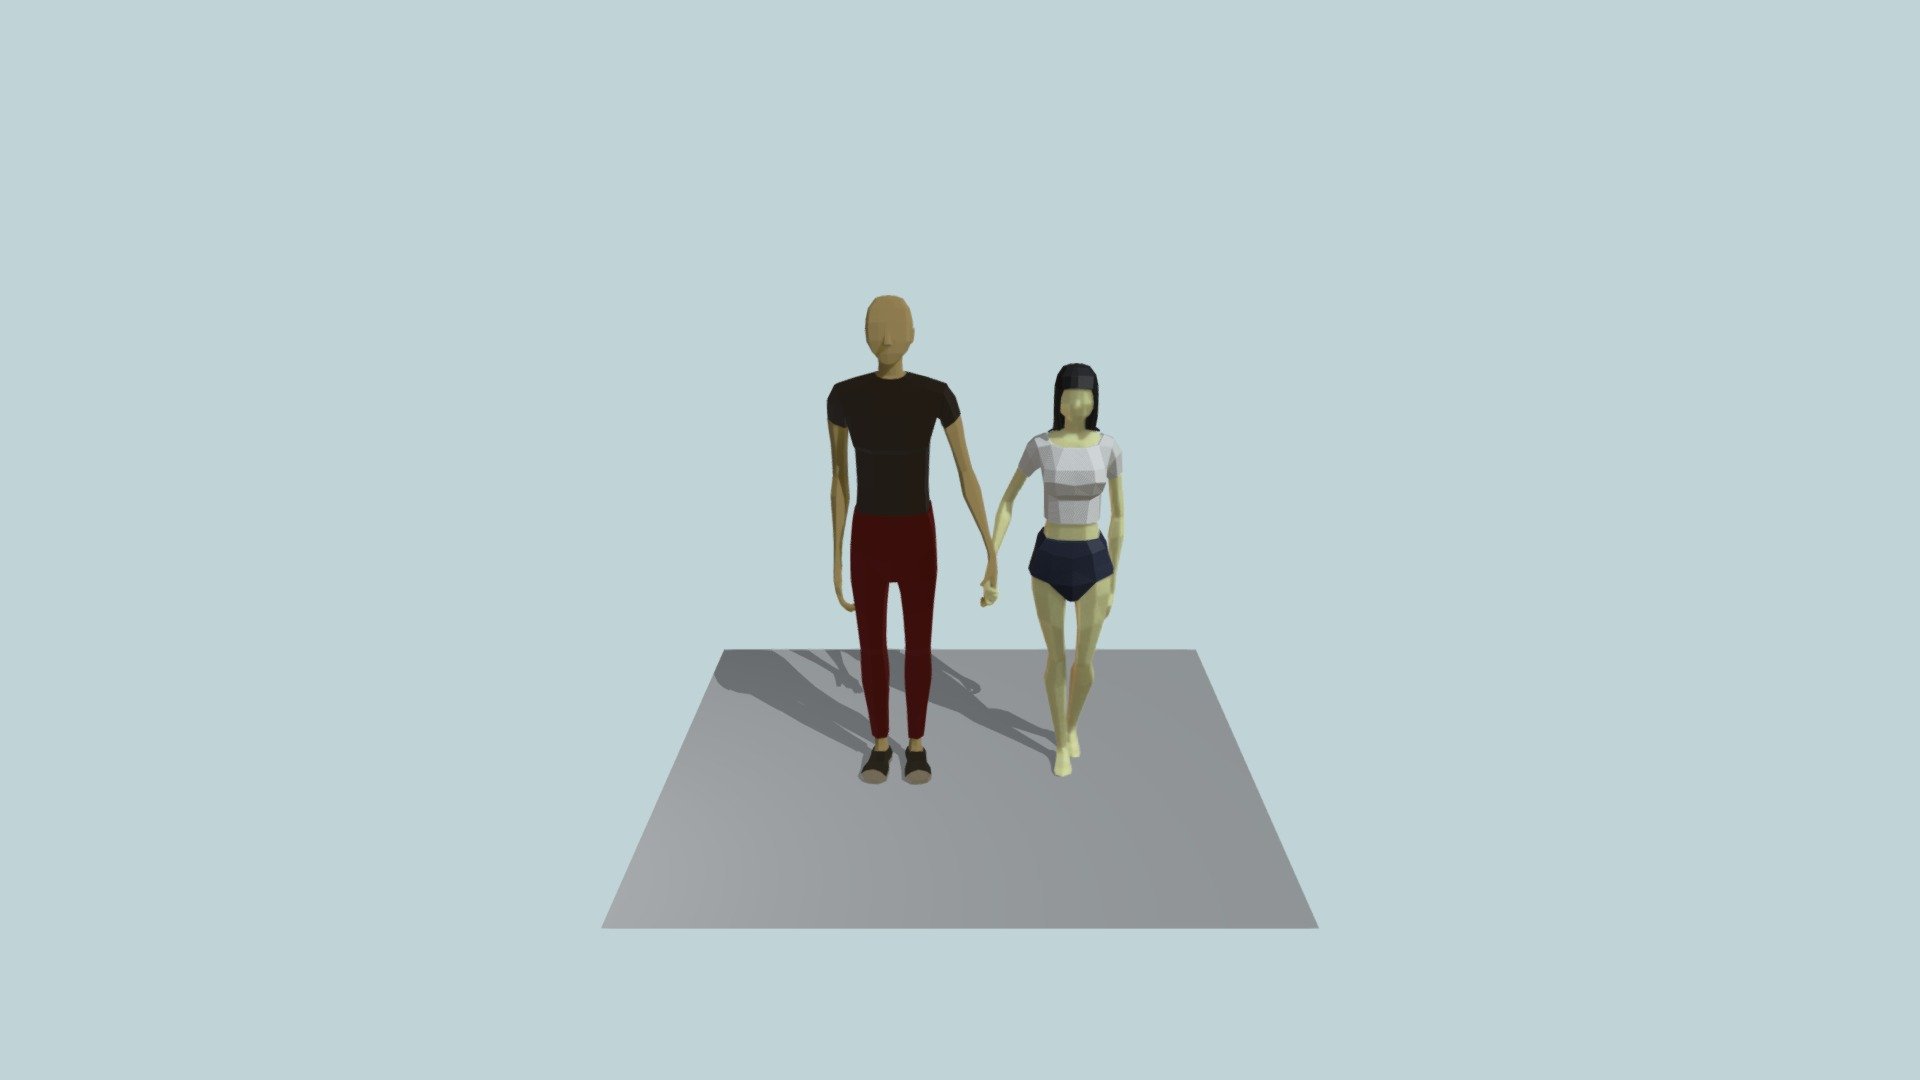 Low poly characters